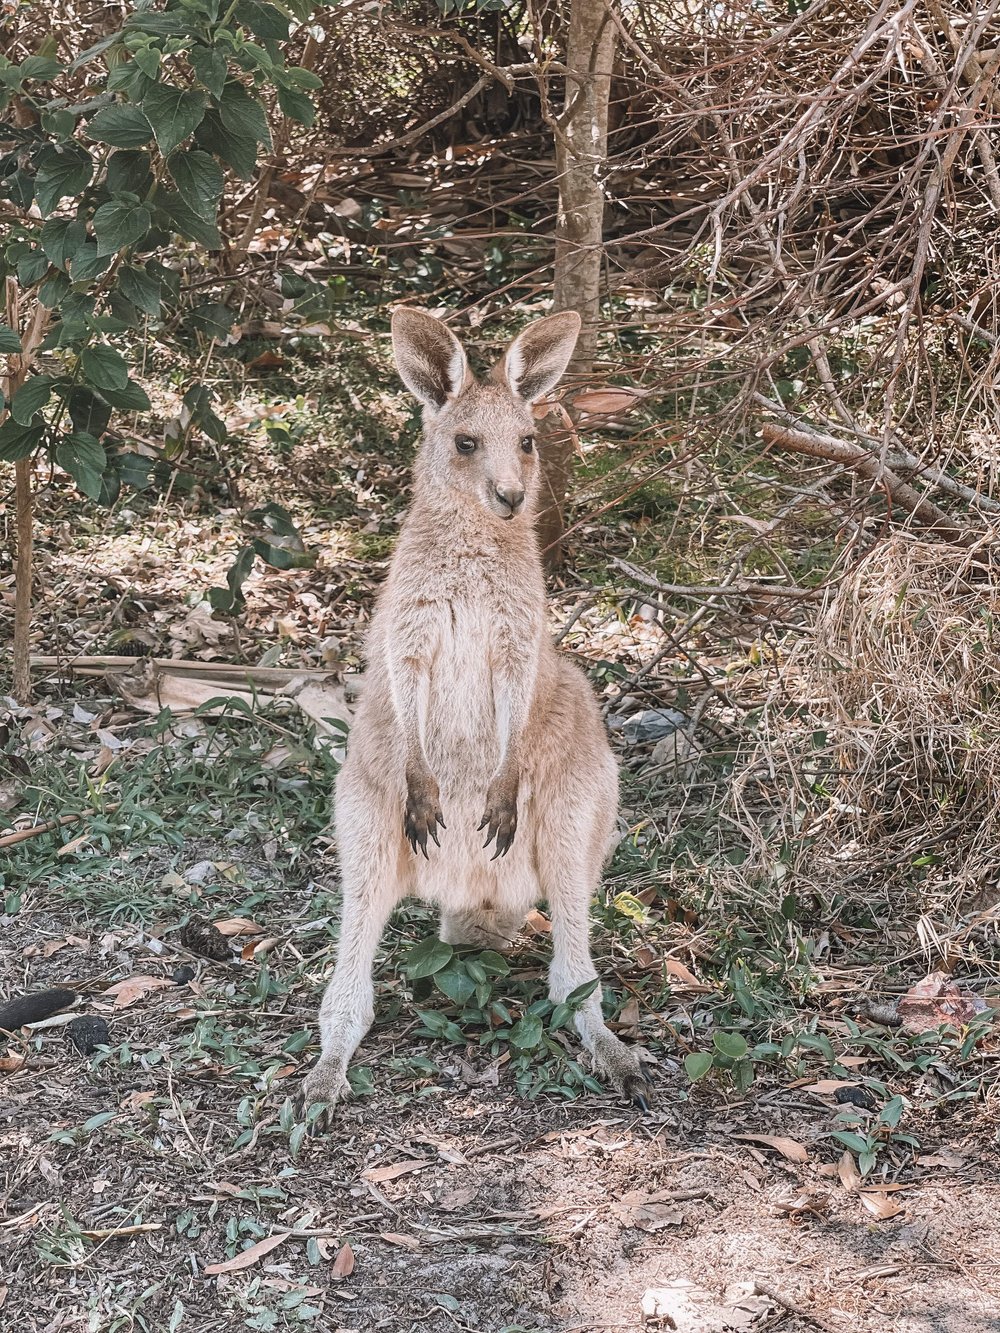 Posing kangaroo in Red Cliff - New South Wales (NSW) - Australia